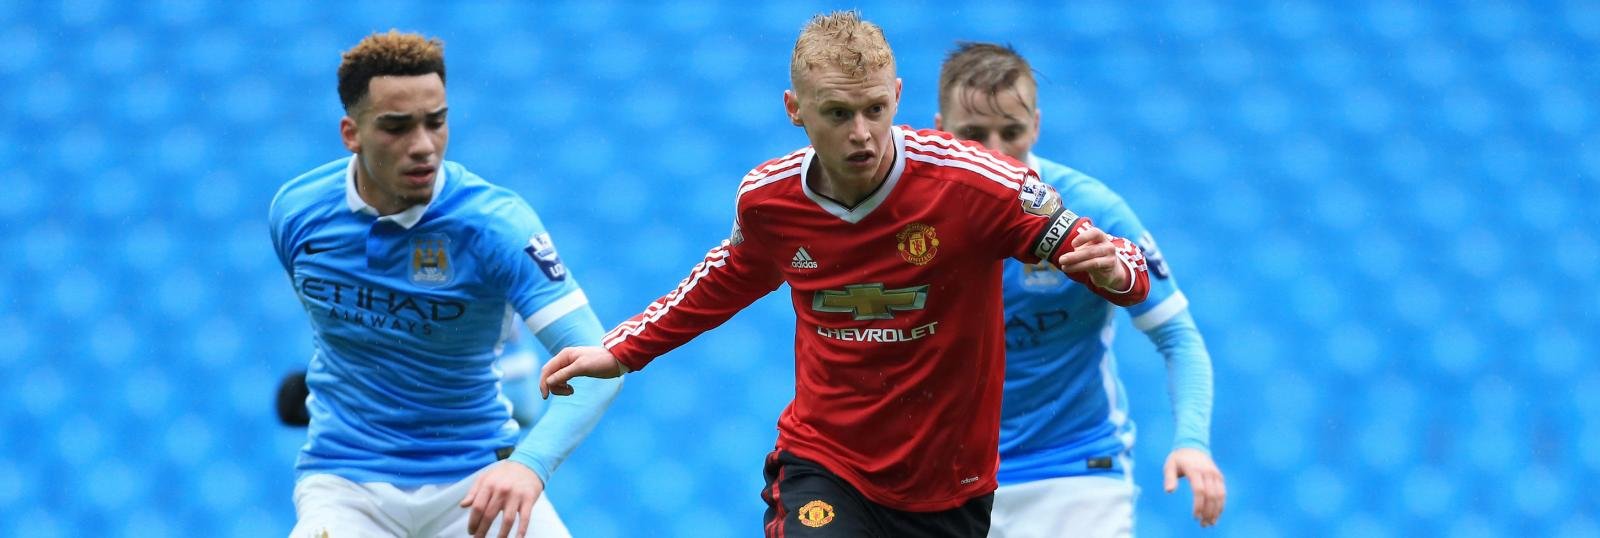 Manchester United sell 21-year-old midfielder to Premier League rivals